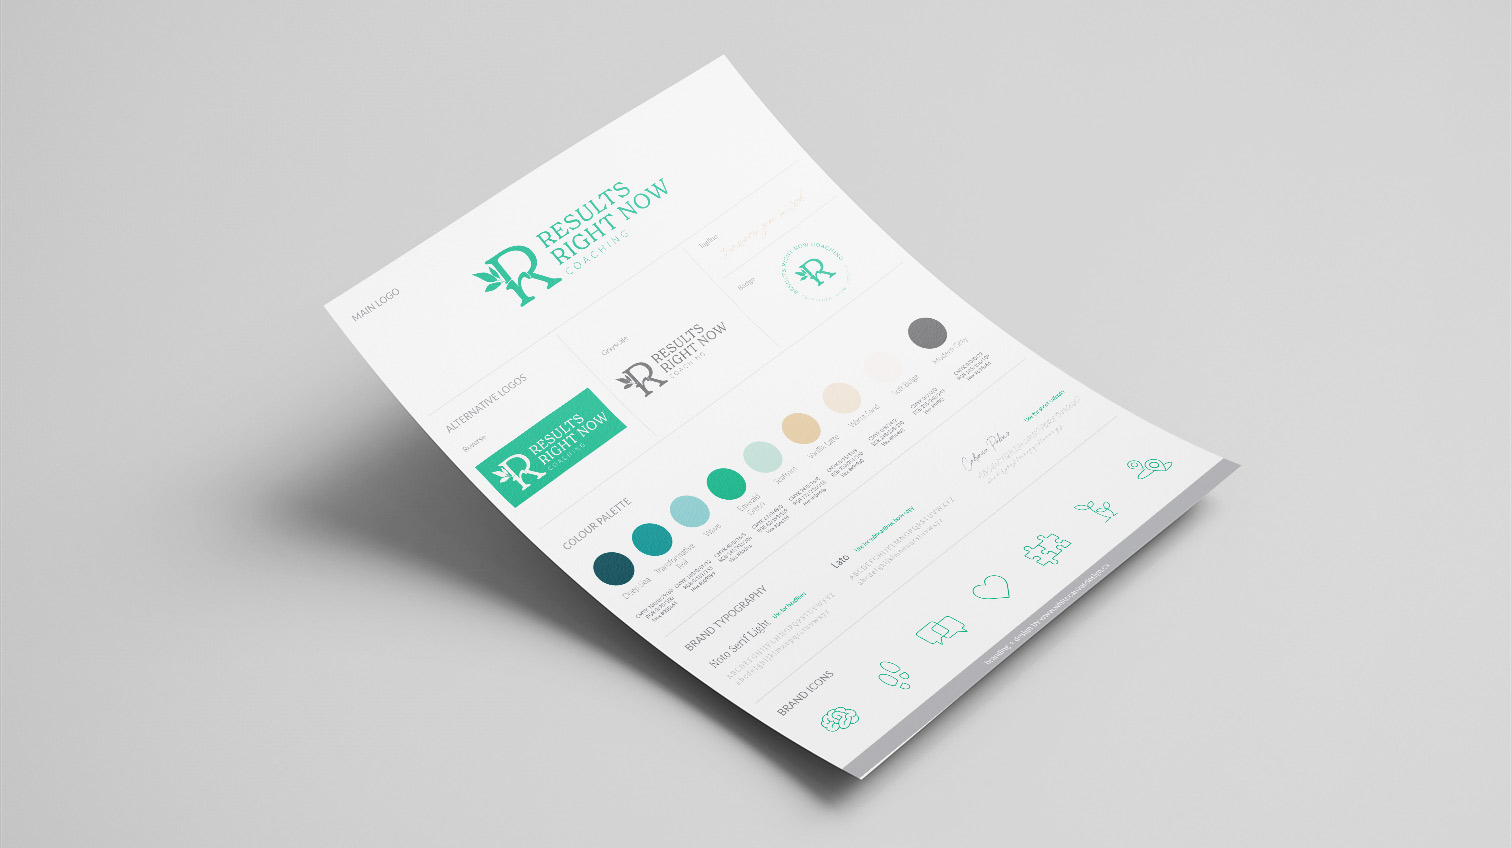 RRN brand / style guideline, shows a variation of logos, colors fonts and icons - White Canvas Design